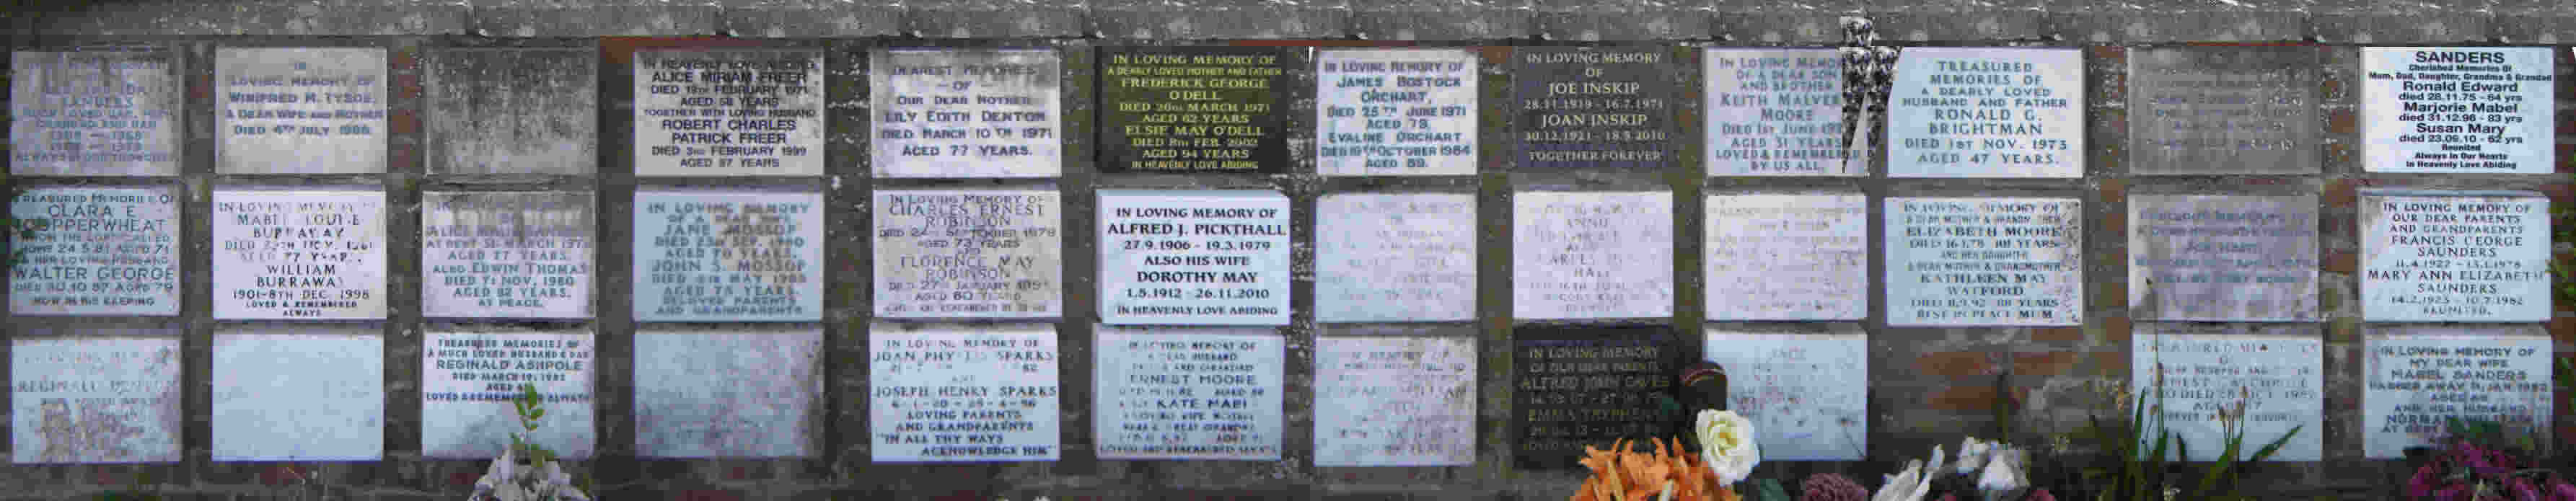 Memorial plaques, Wootton, Bedford